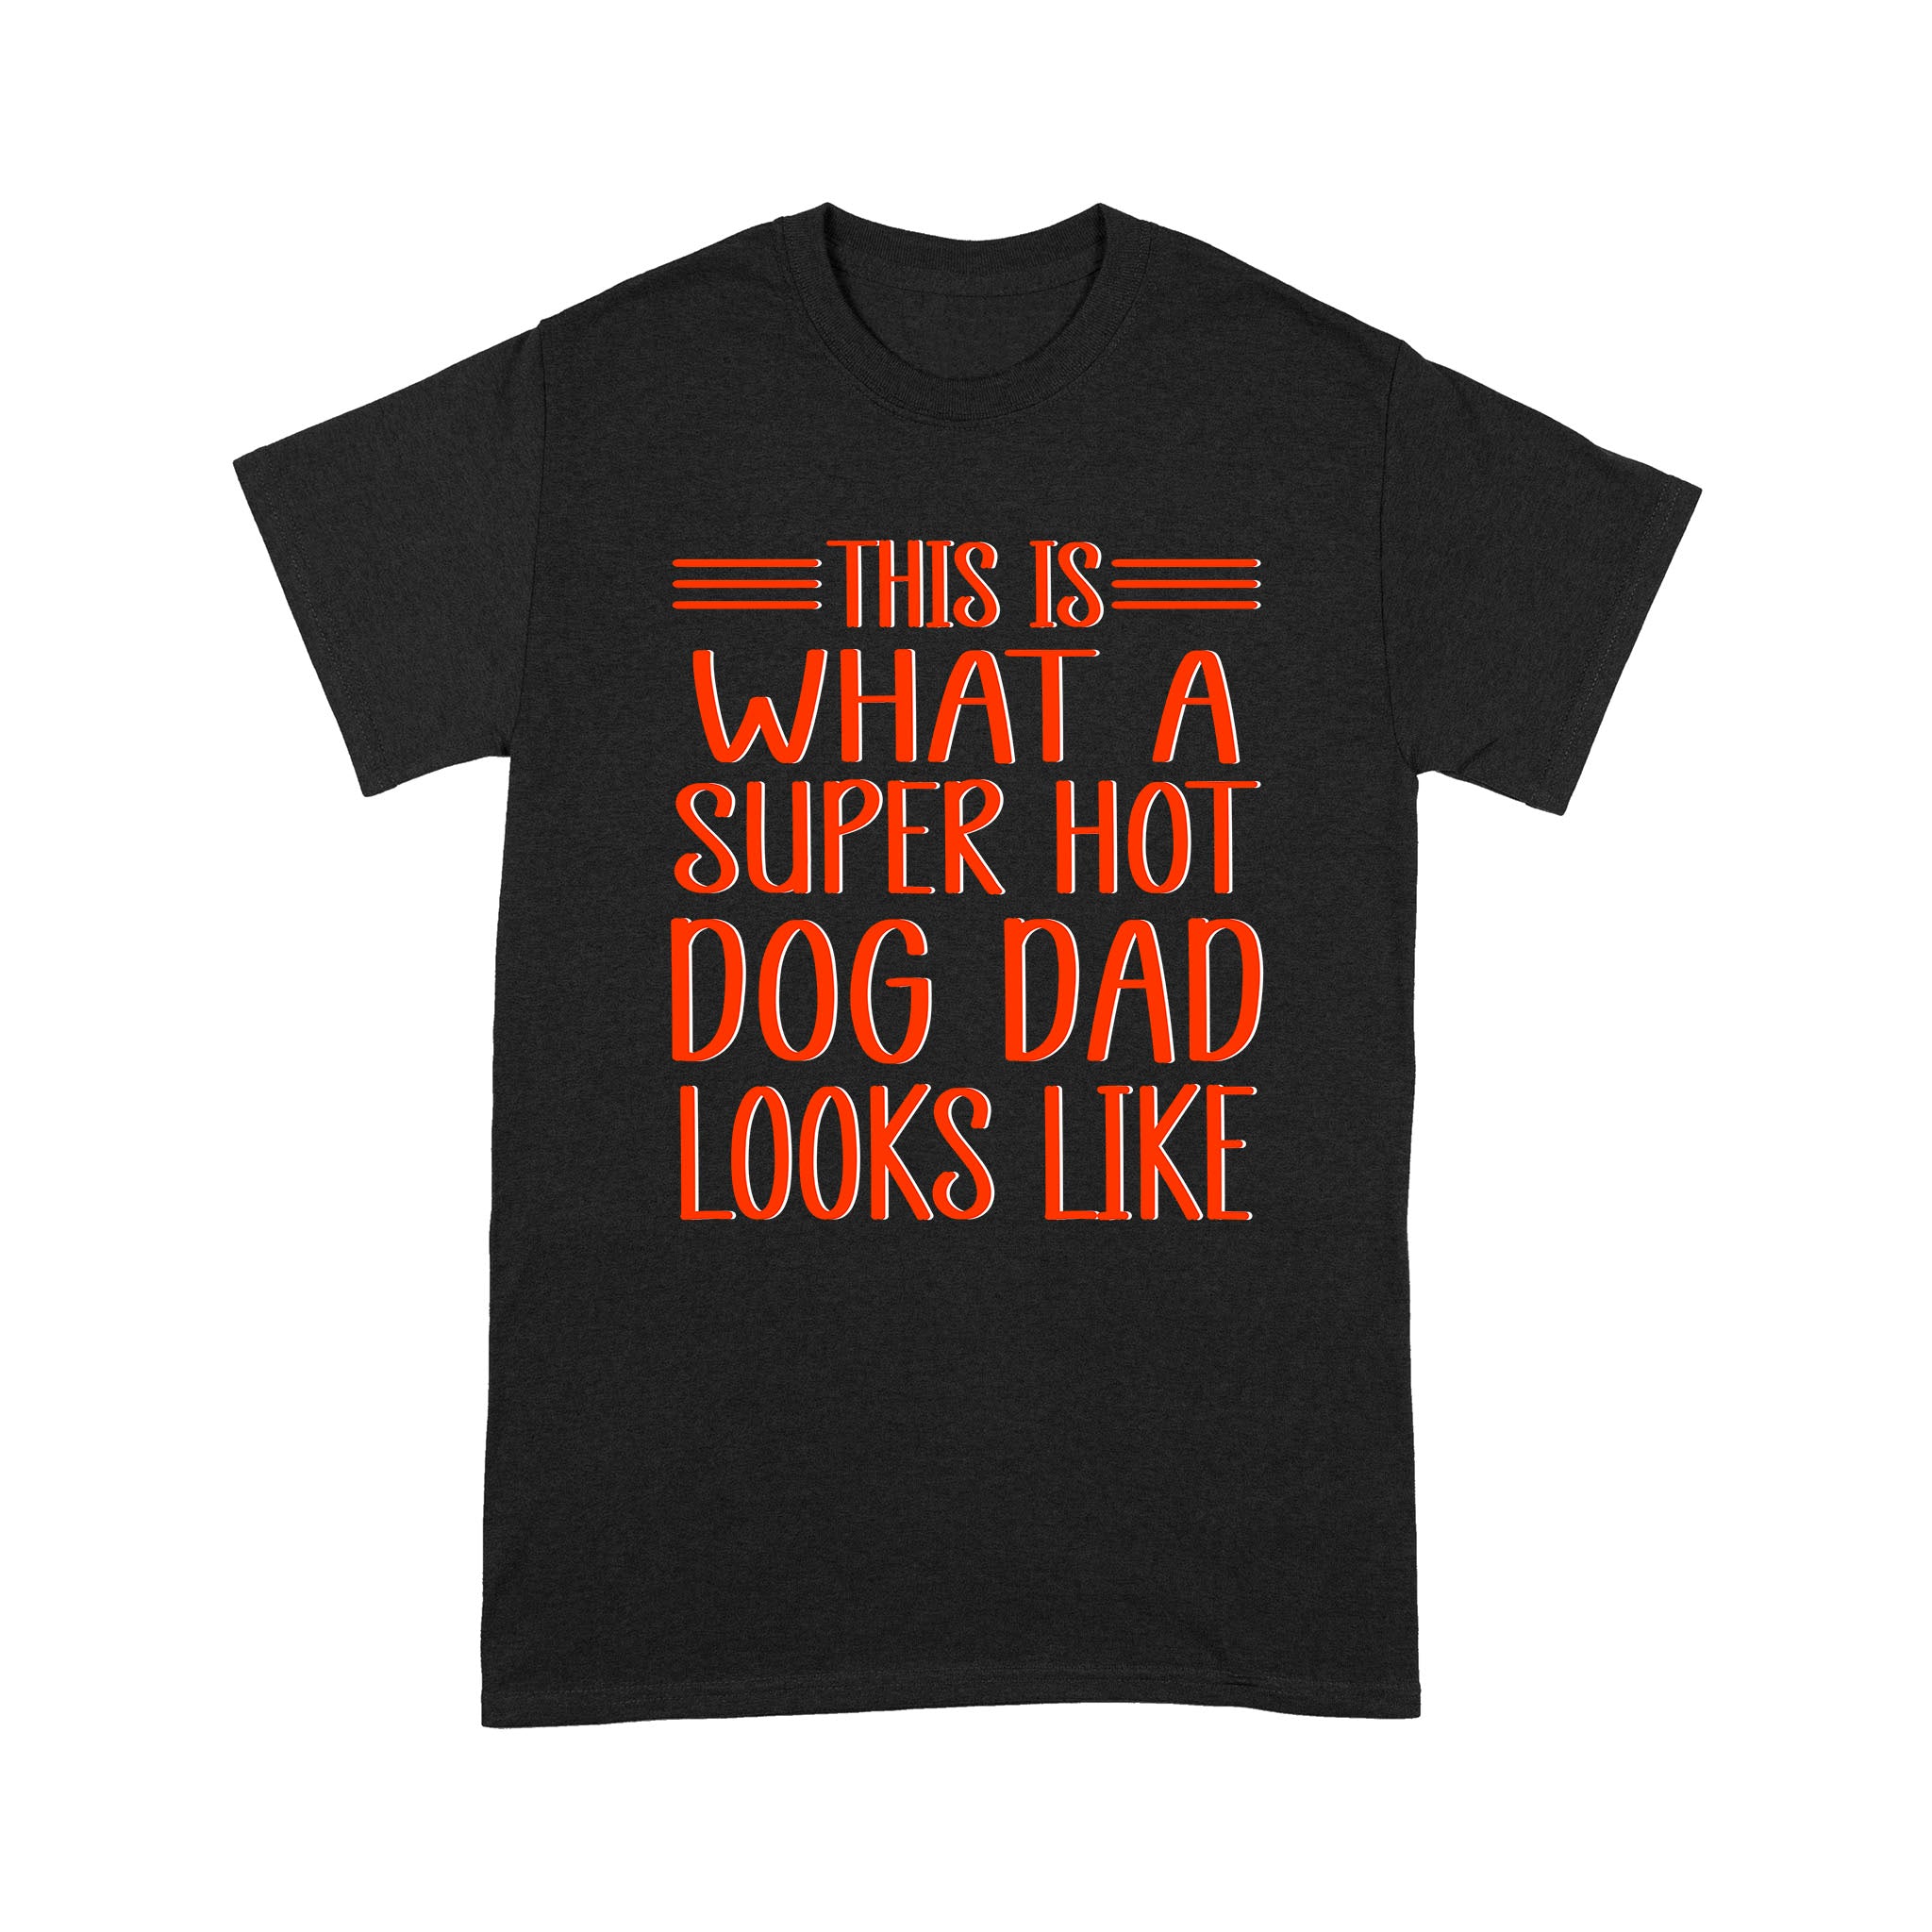 Funny Dog Dad Shirt| This Is What A Super Hot Dog Dad Looks Like| Dog Dad Gift for Father's Day, Fur Dog| JTSD200